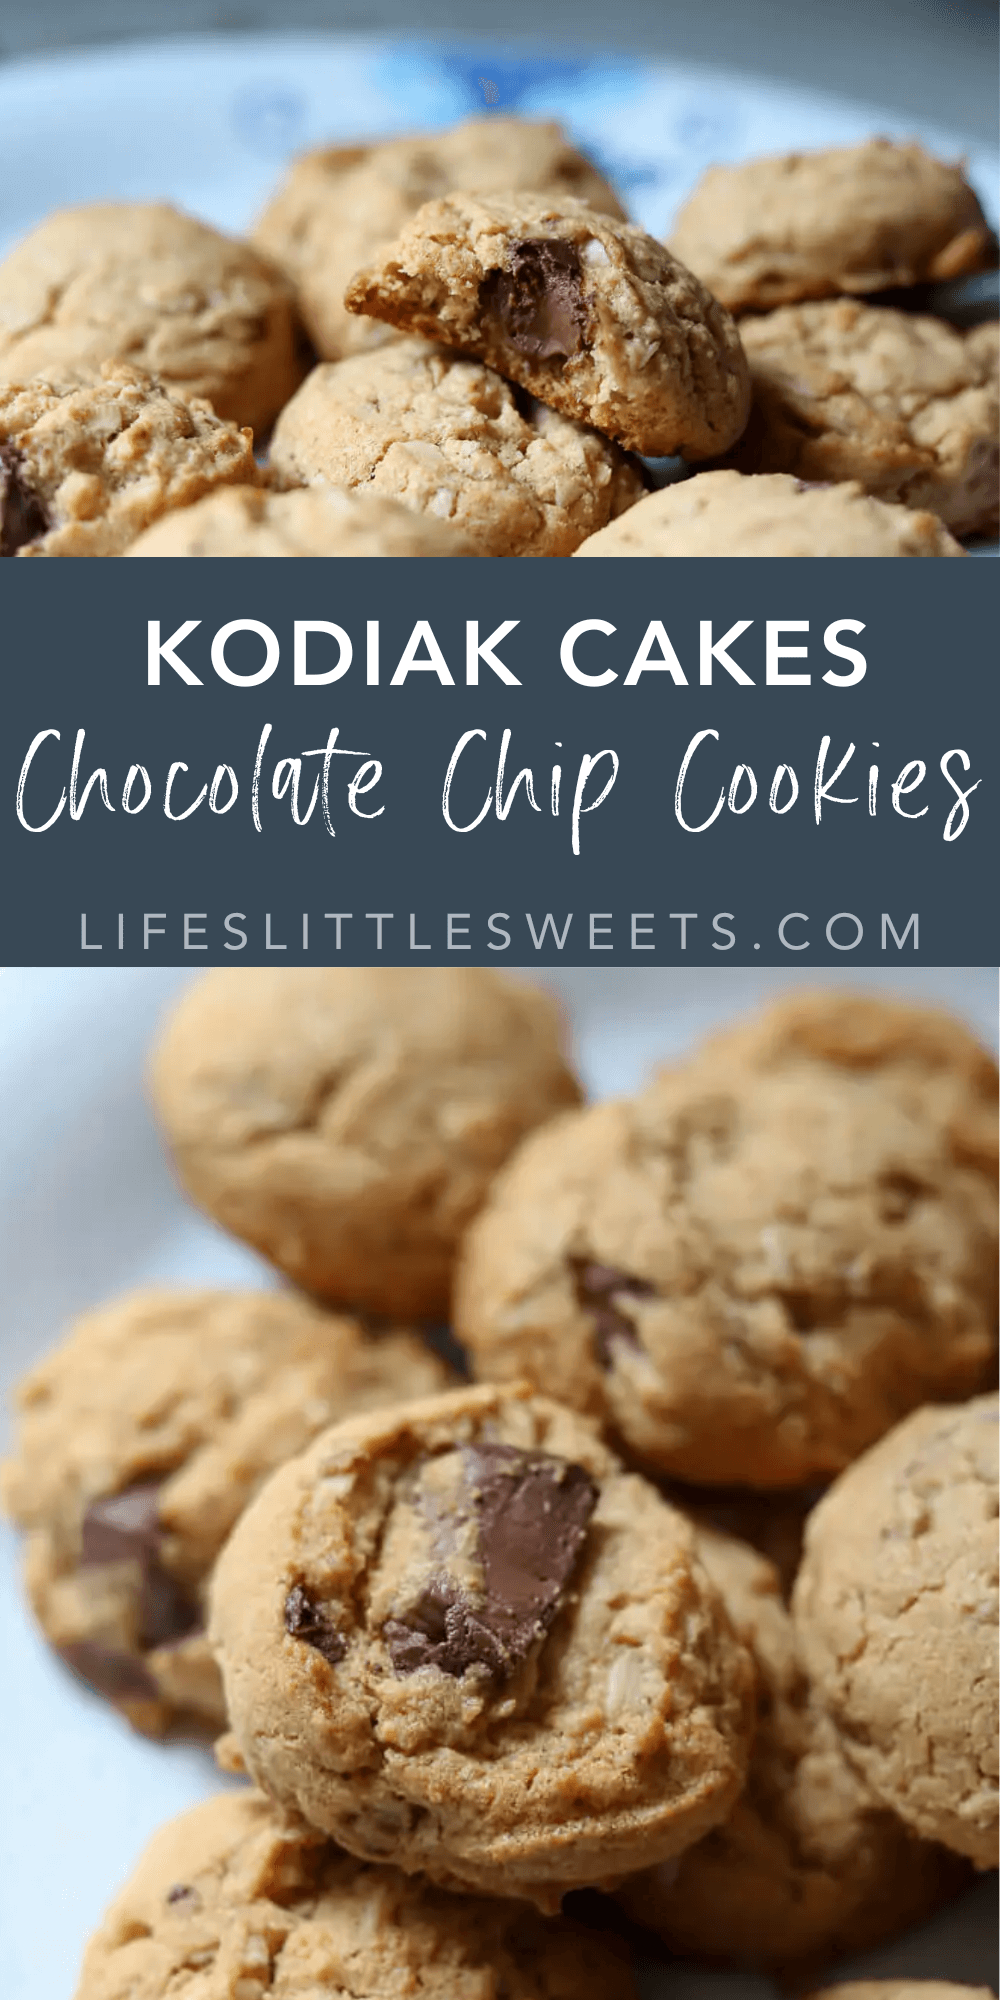 Kodiak Cakes Chocolate Chip Cookies with text overlay